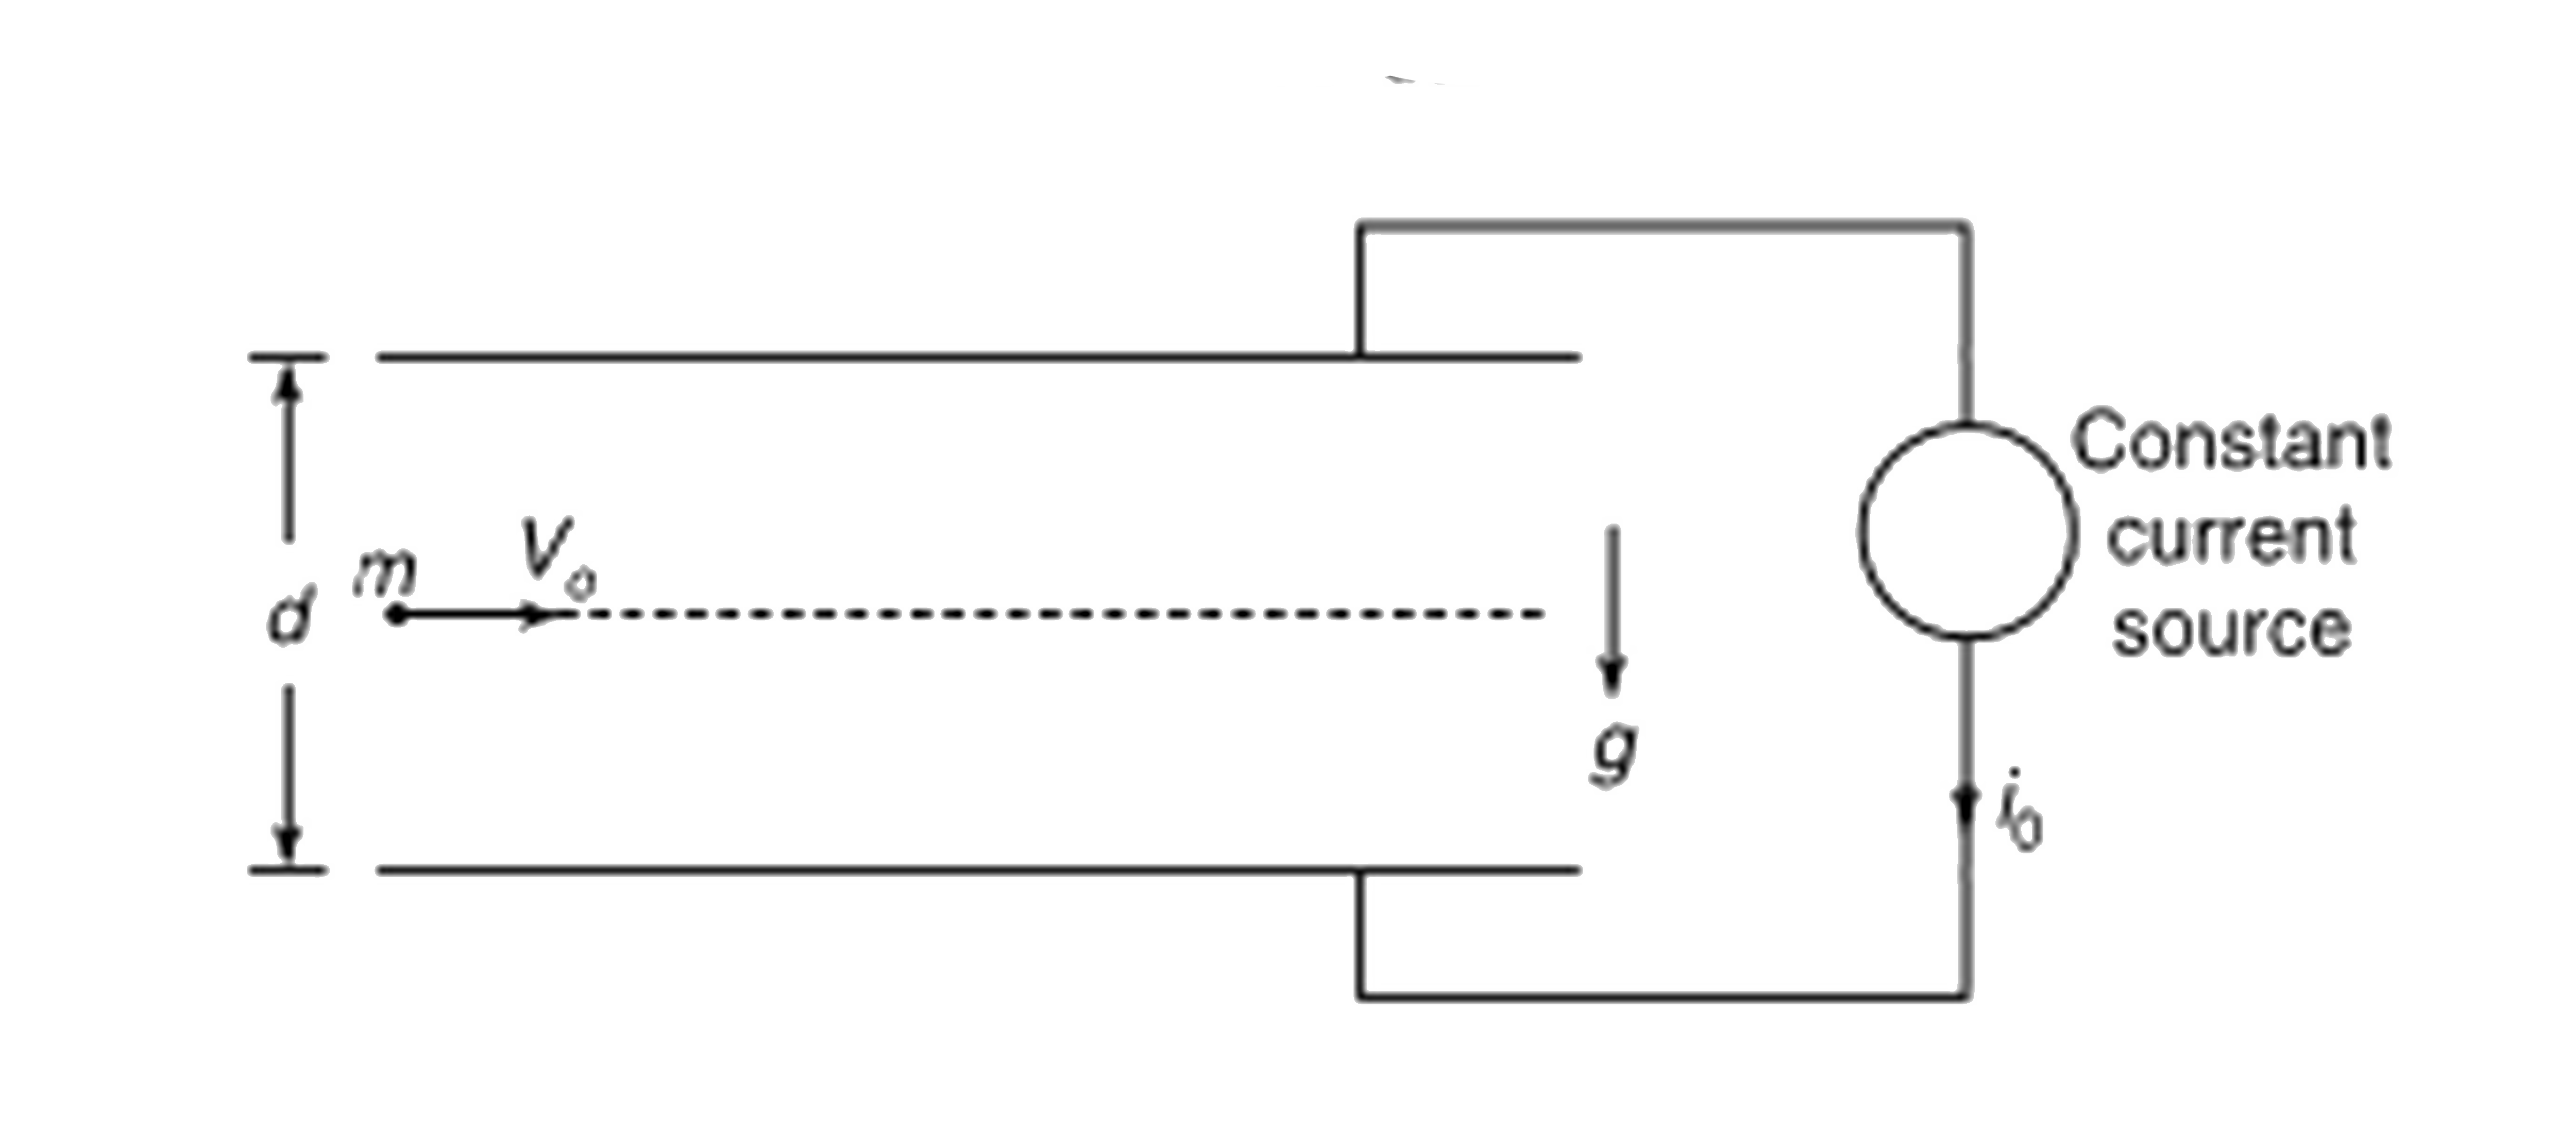 A diode is a device that conducts in one direction only. Figure (a) shows the symbol for a diode. When terminal A is at higher potential than B, the diode conducts, it means current flows from A to B. No current flows if B is kept at higher potential. Find the potential difference between terminals C and D after the switch (S) is closed in the circuit shown in Figure (b).